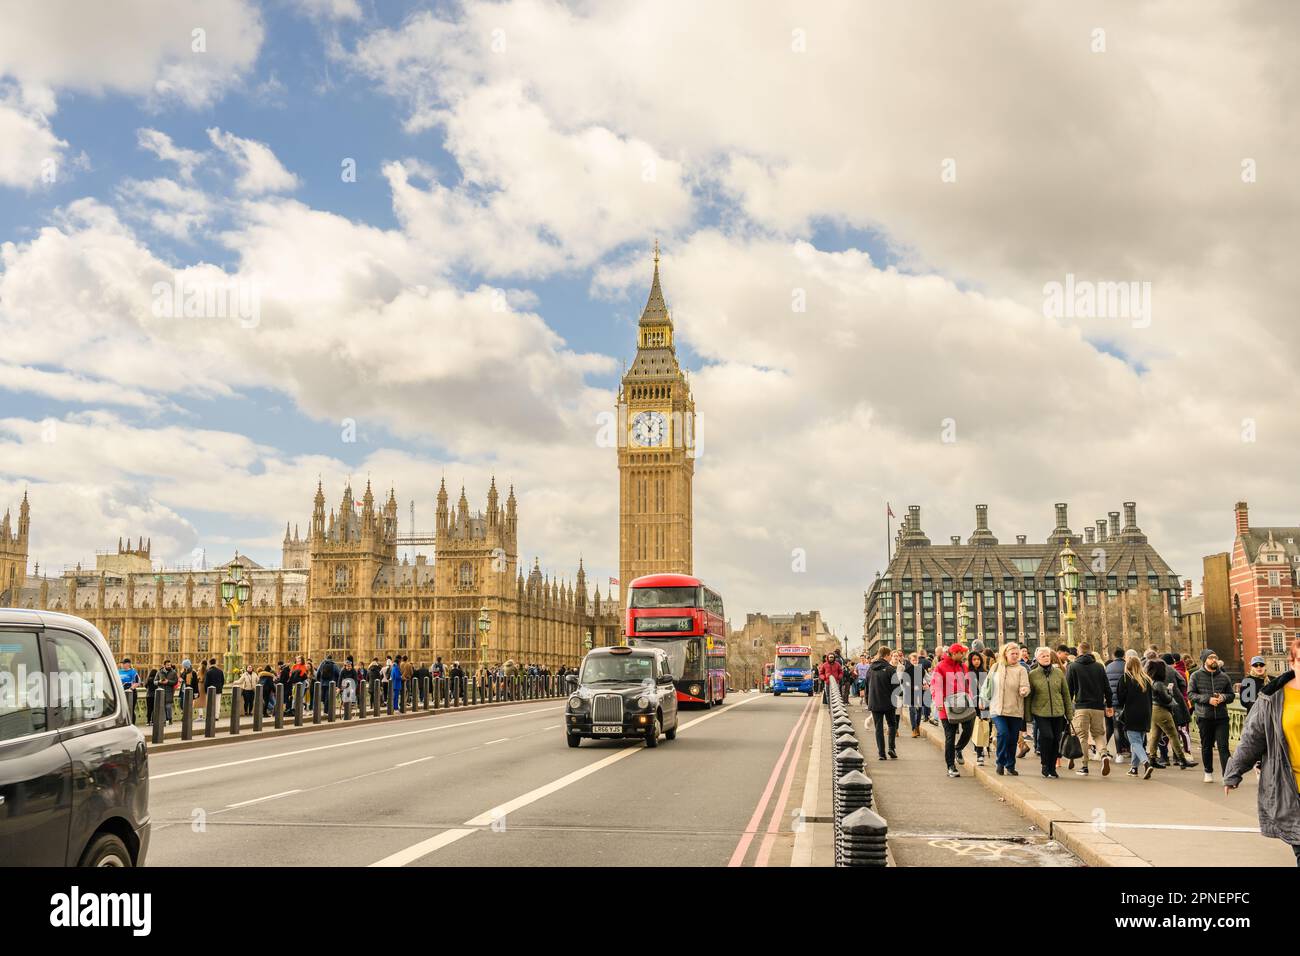 A bustling city street over a bridge near the Big Ben in London, United ...